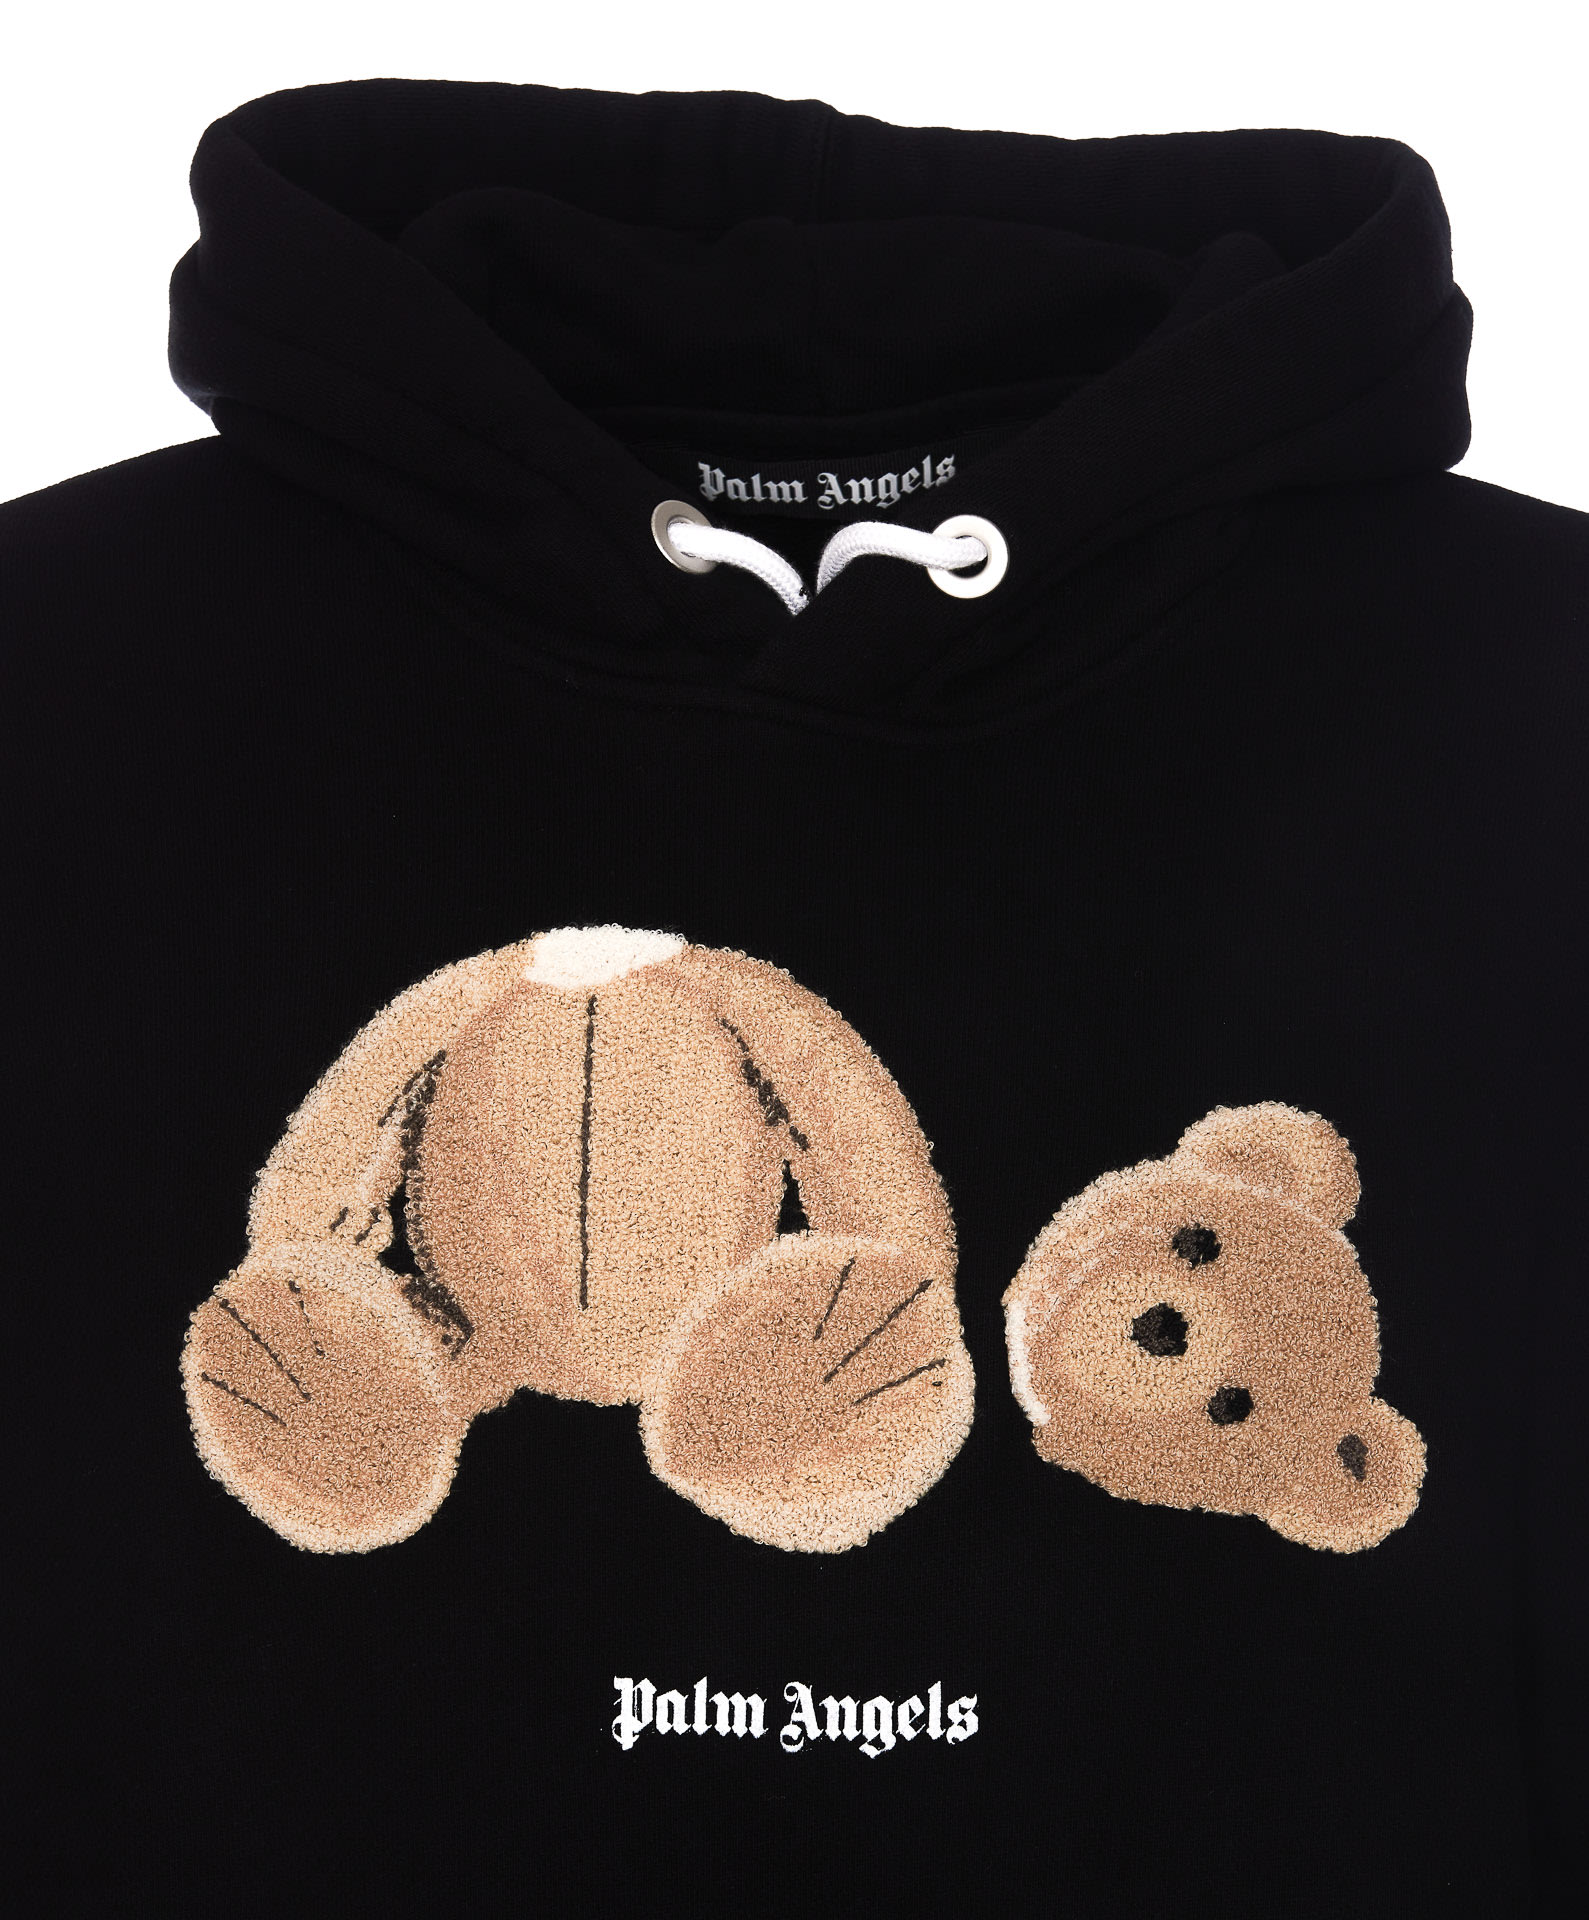 Bear embroidery cotton hoodie - Palm Angels - Men